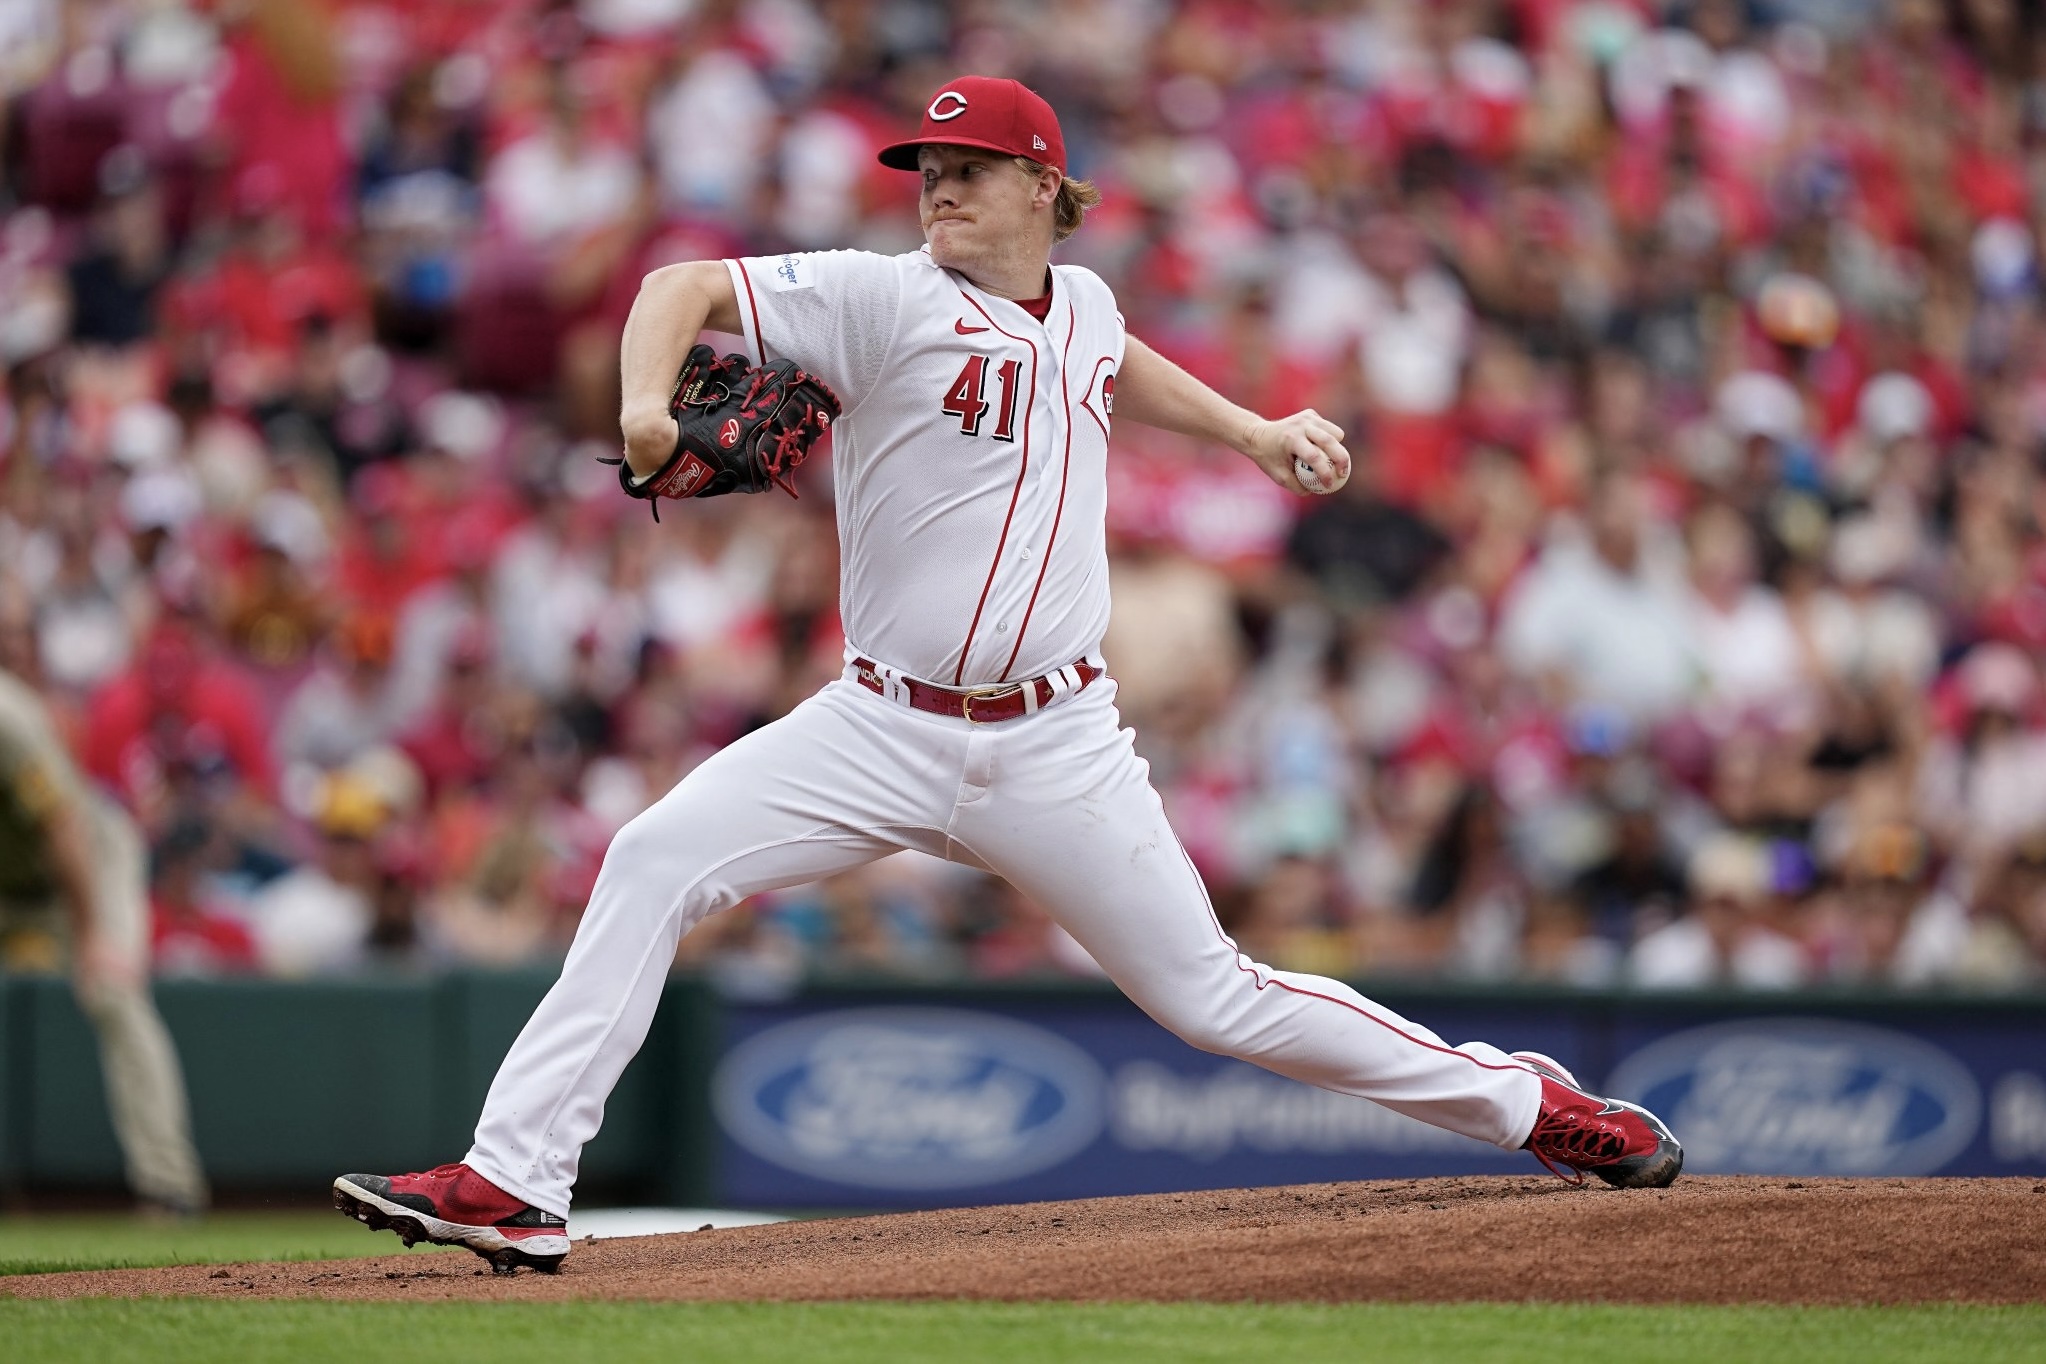 Abbott continues to shine with Cincinnati Reds in MLB